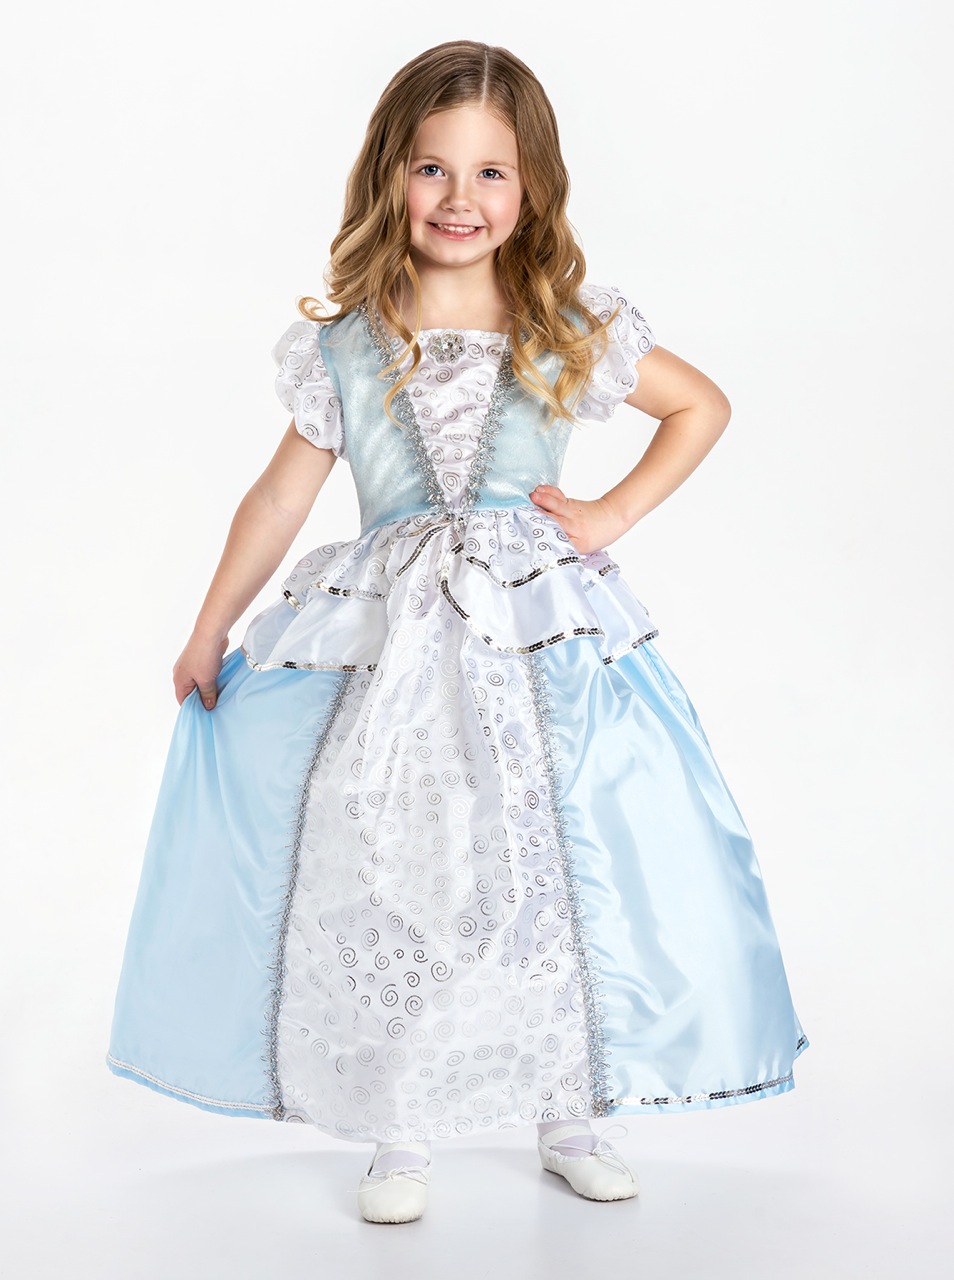 Mom Approved Costumes Cinderella Dress Giveaway